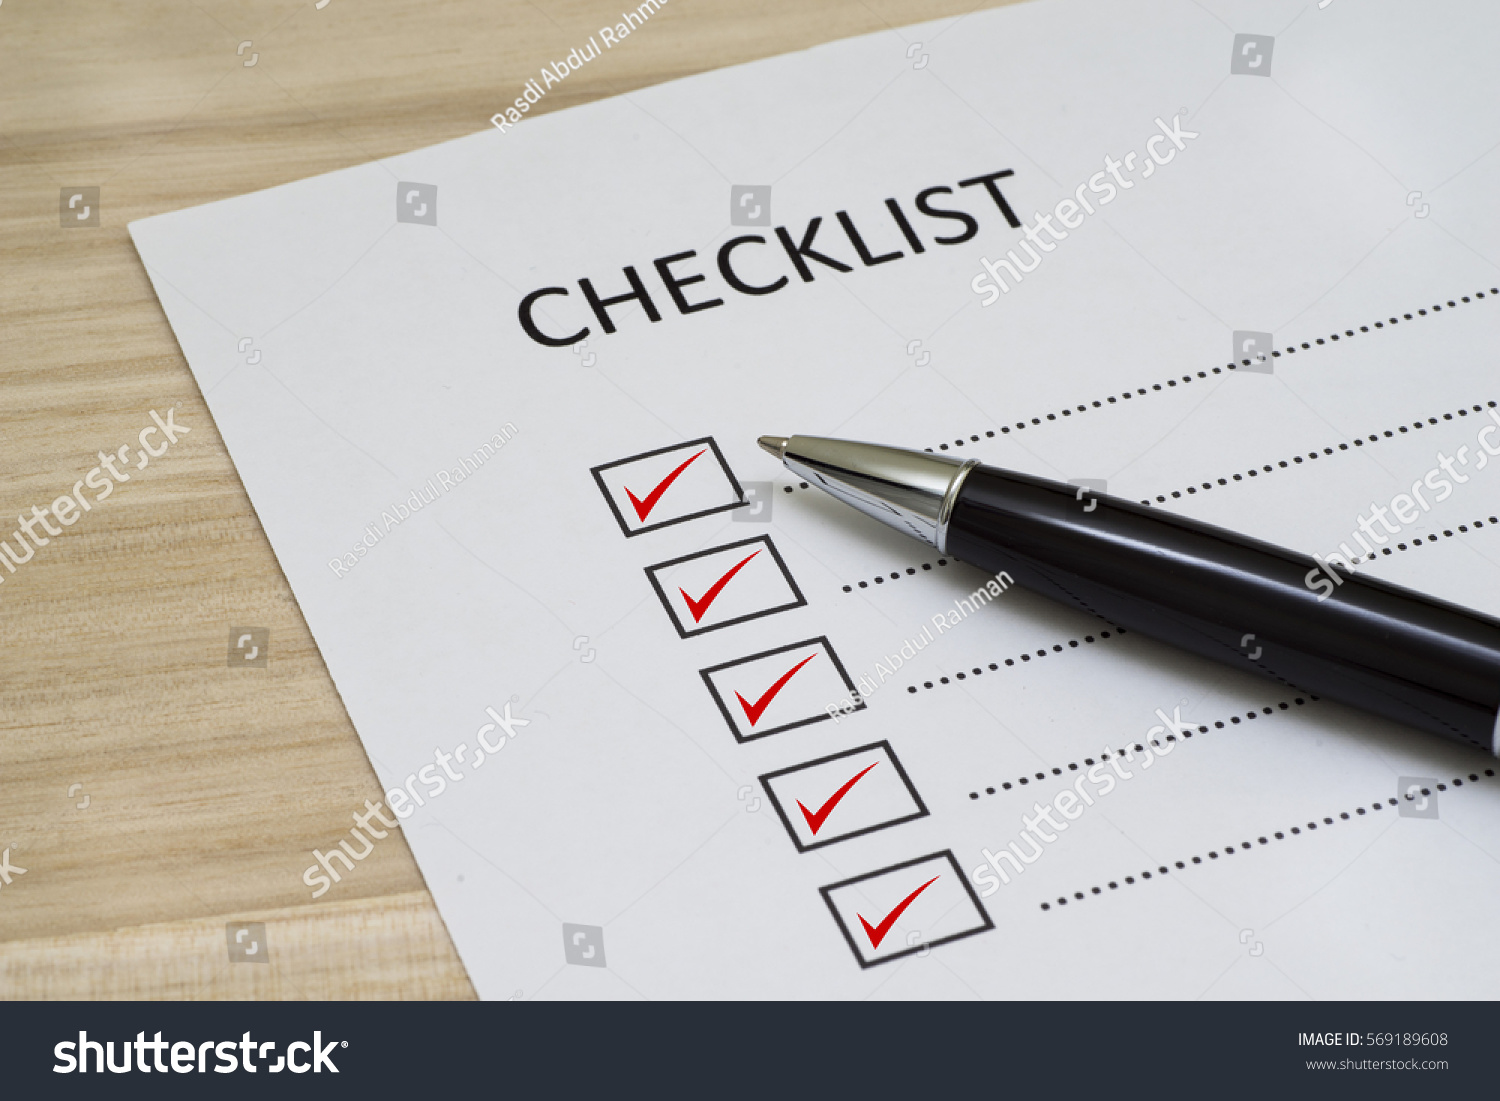 Checklist concept - checklist box with red checkmark, paper and a pen with checklist word on wooden table #569189608